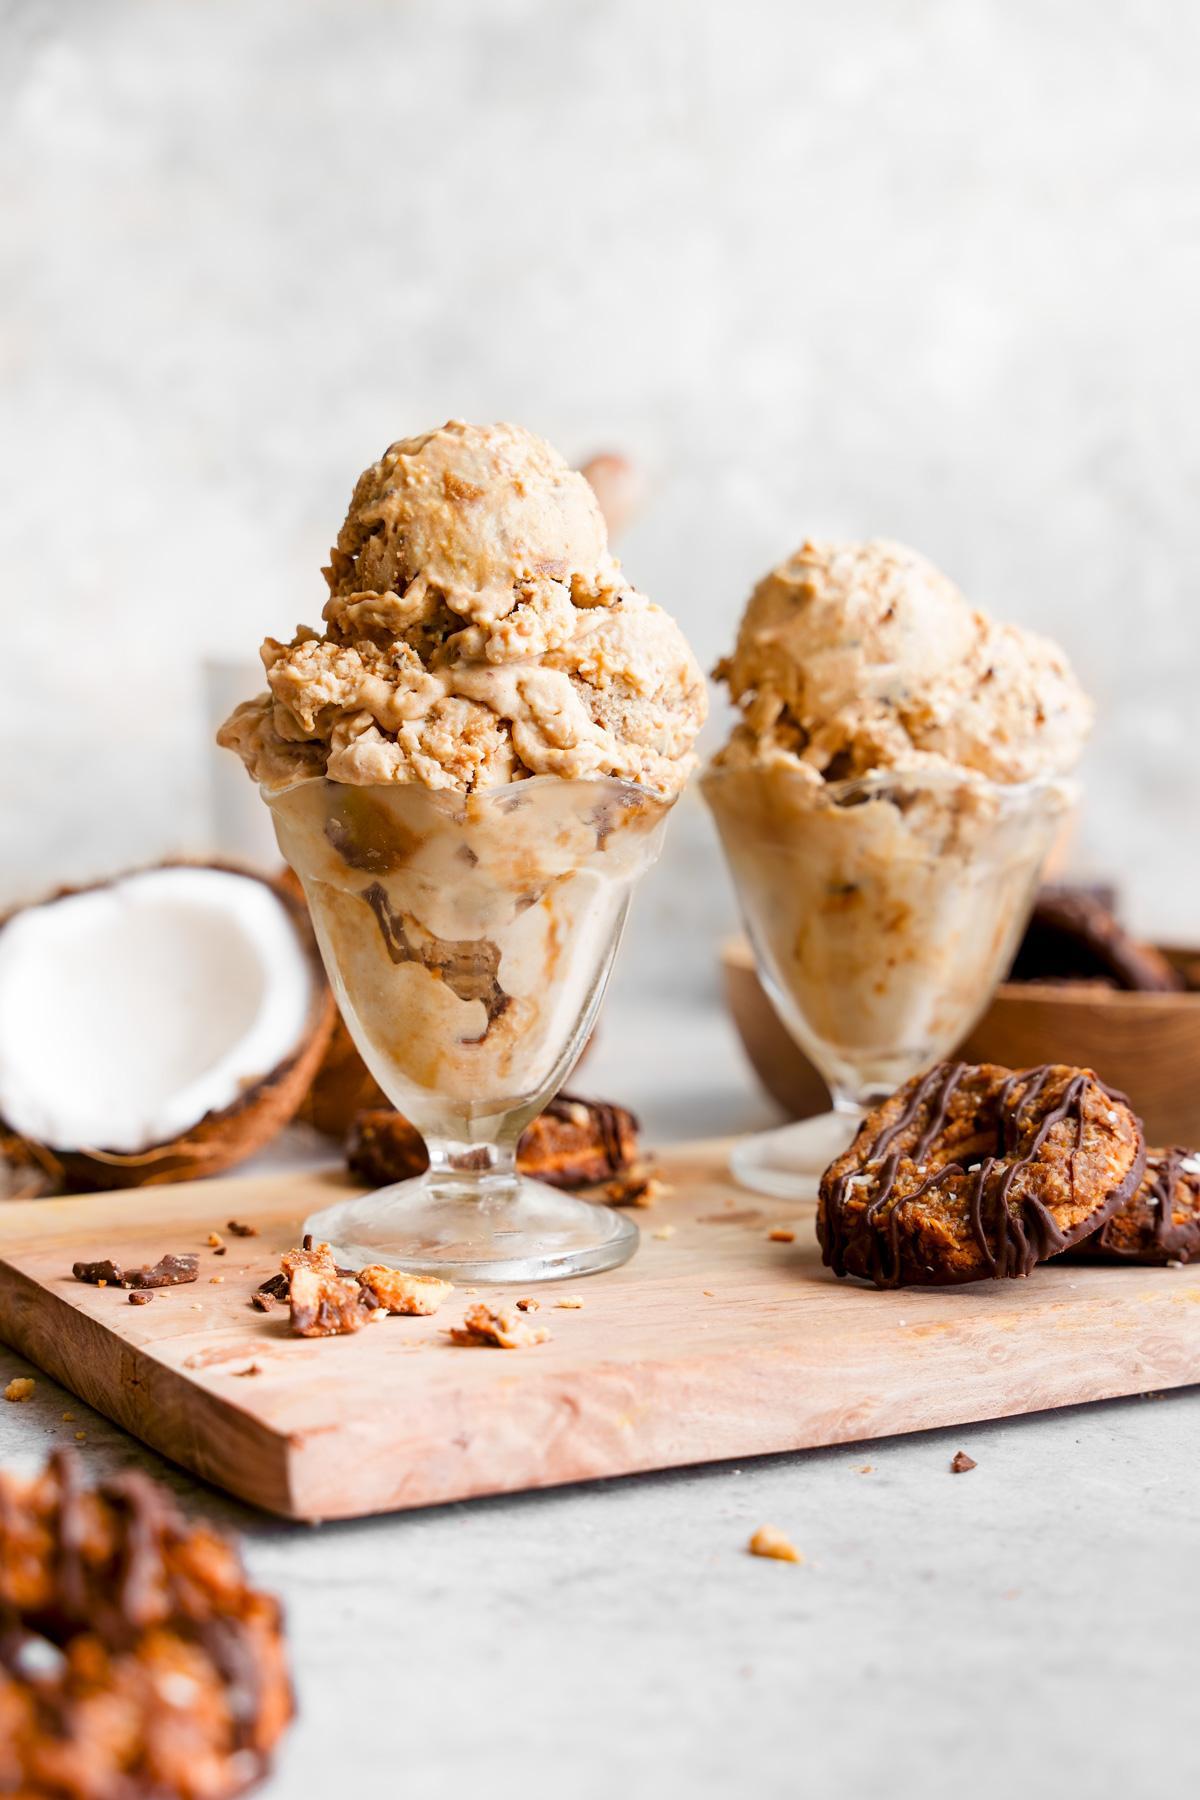 the samoa ice cream in ice cream cups with samoa cookies and coconut all around